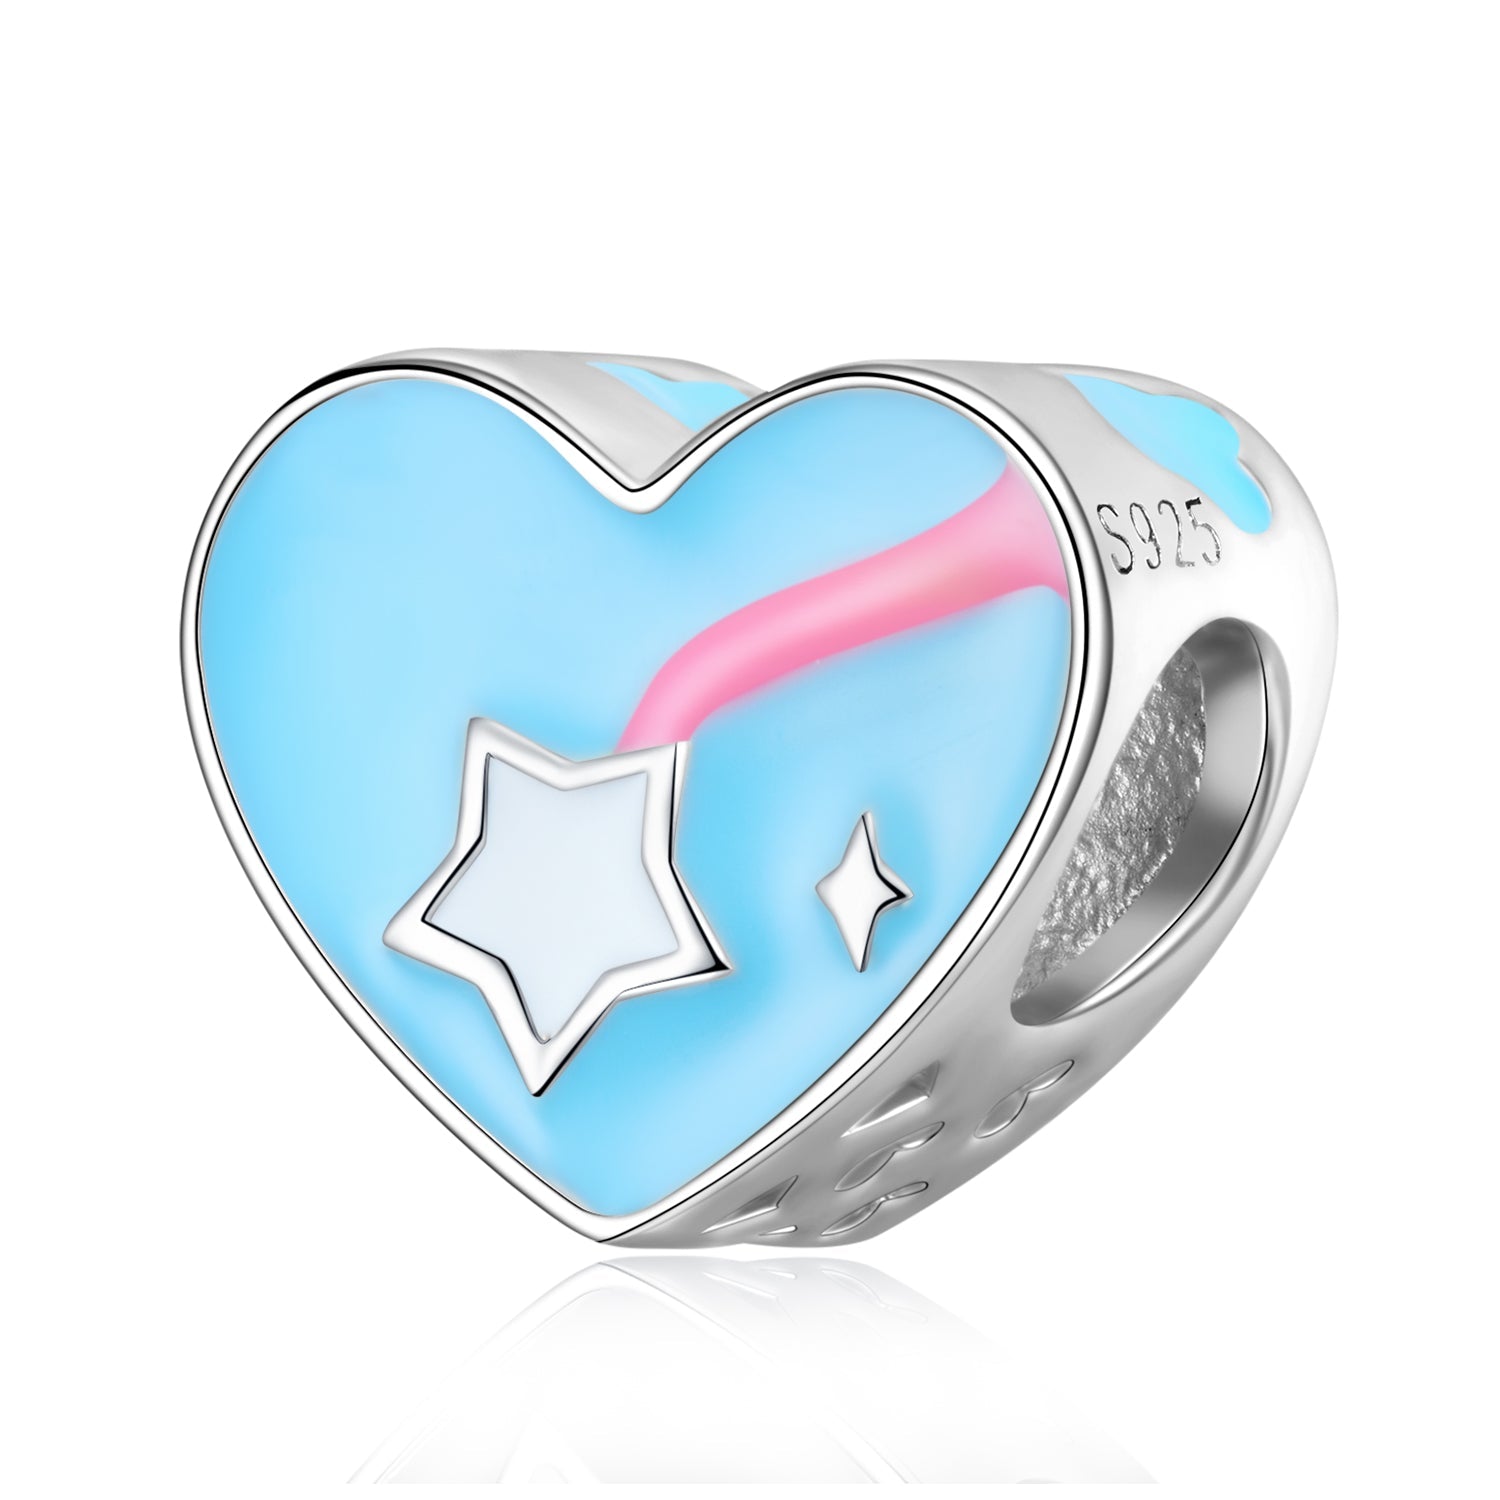 Turquoise heart with shooting star